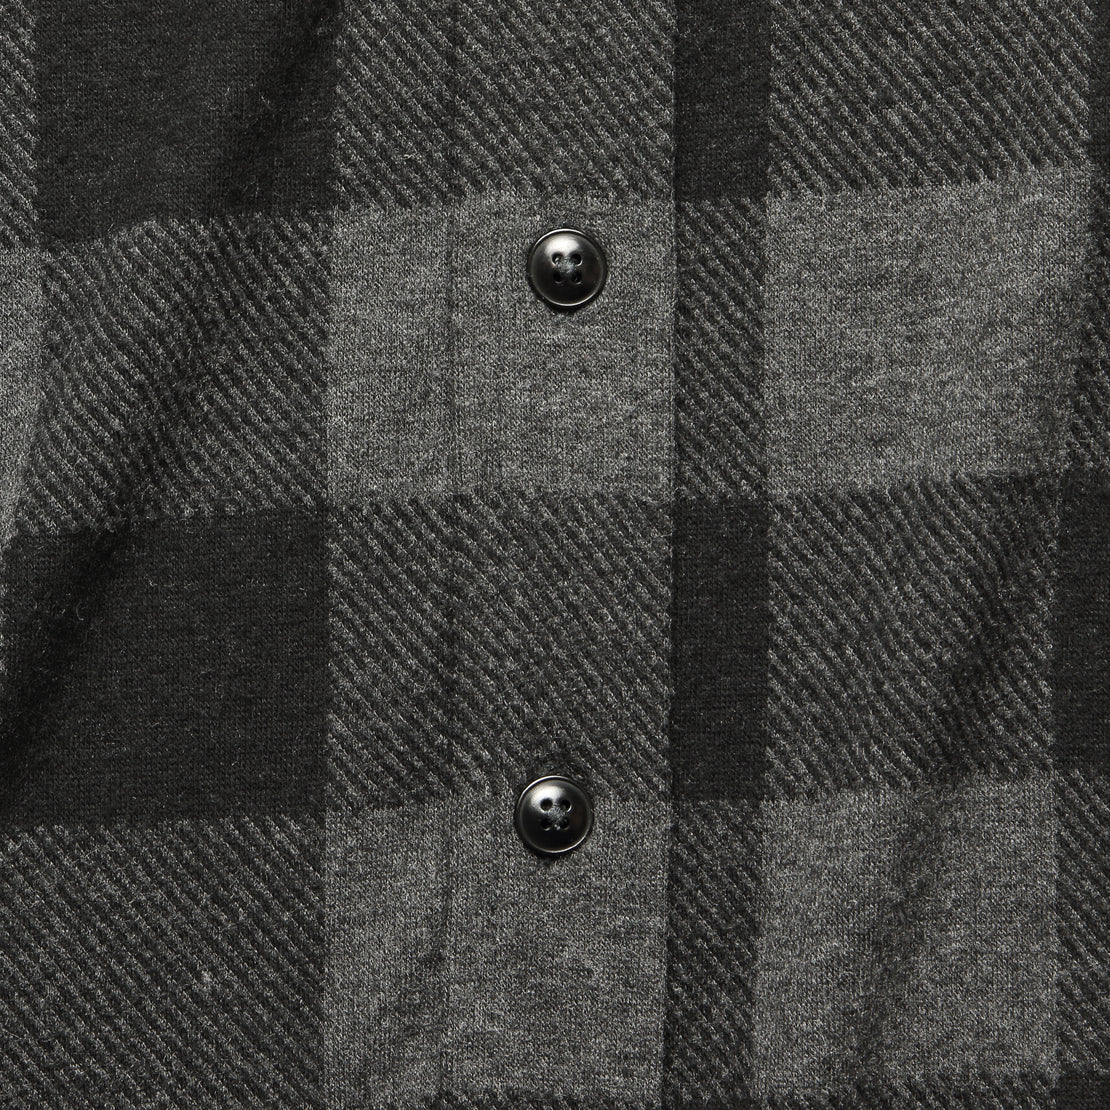 Legend Sweater Shirt - Charcoal Black Buffalo - Faherty - STAG Provisions - Tops - Sweater